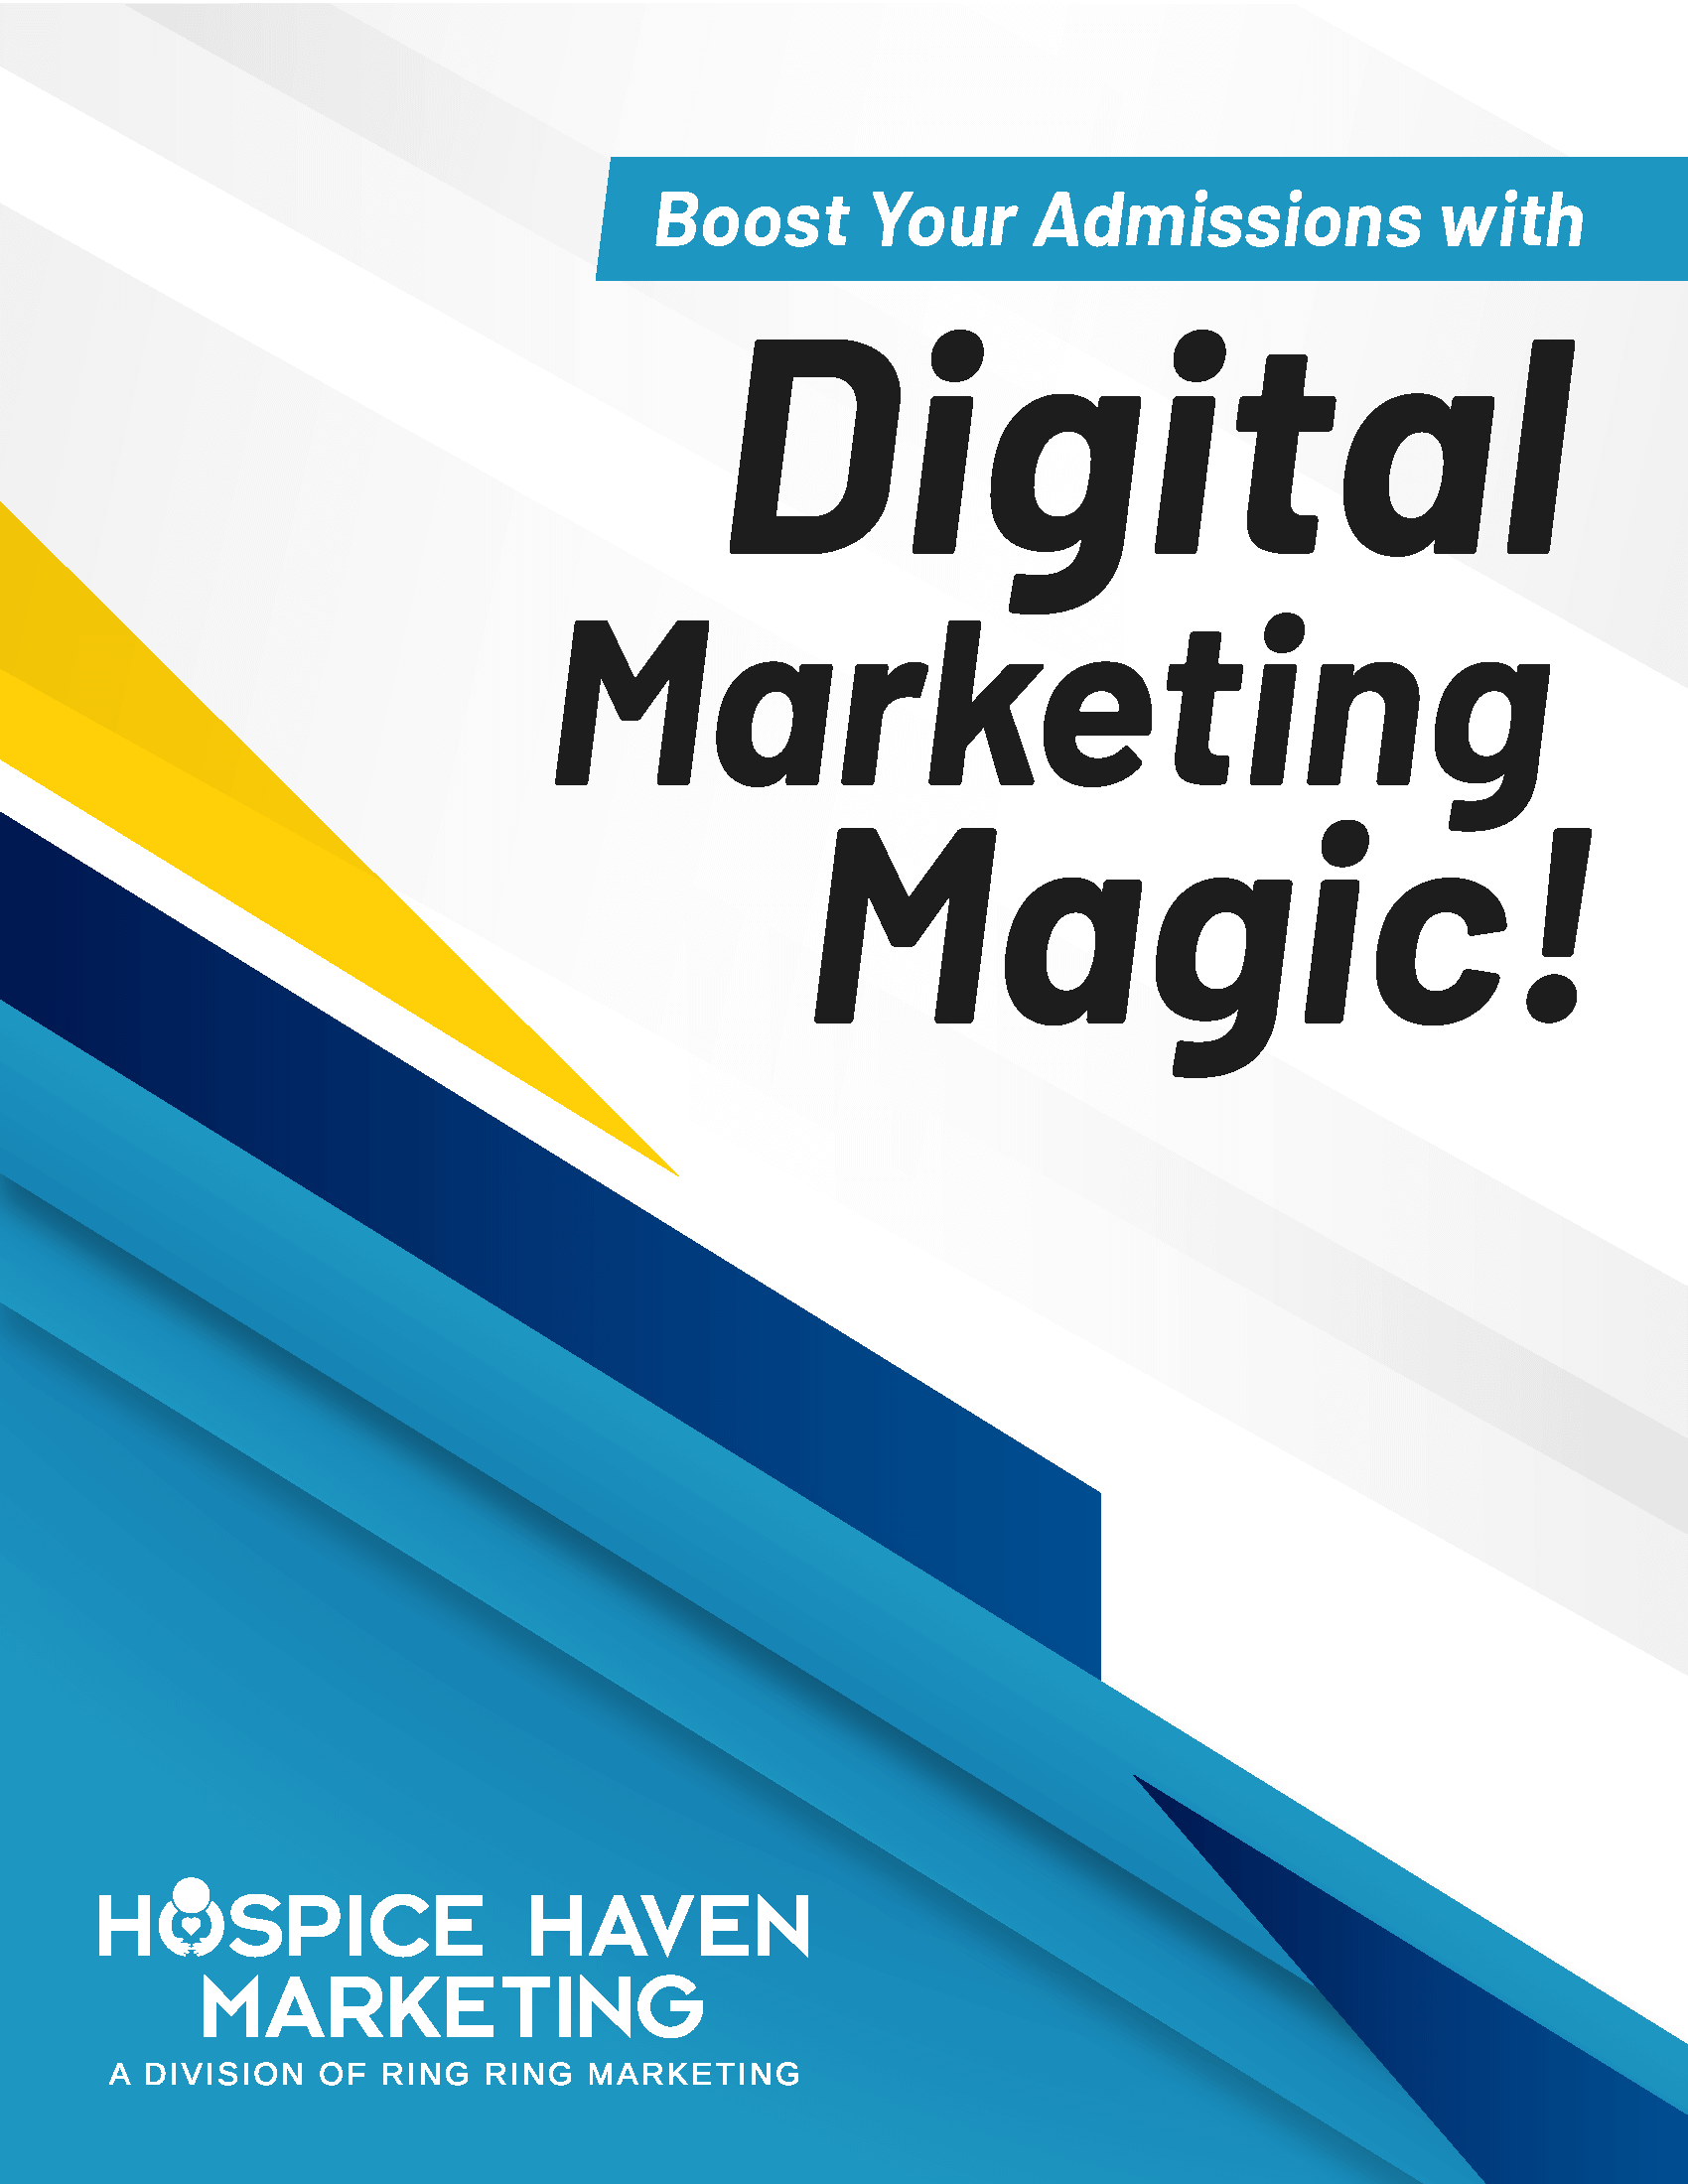 Hospice Heroes: Boost Your Admissions with Digital Marketing Magic!